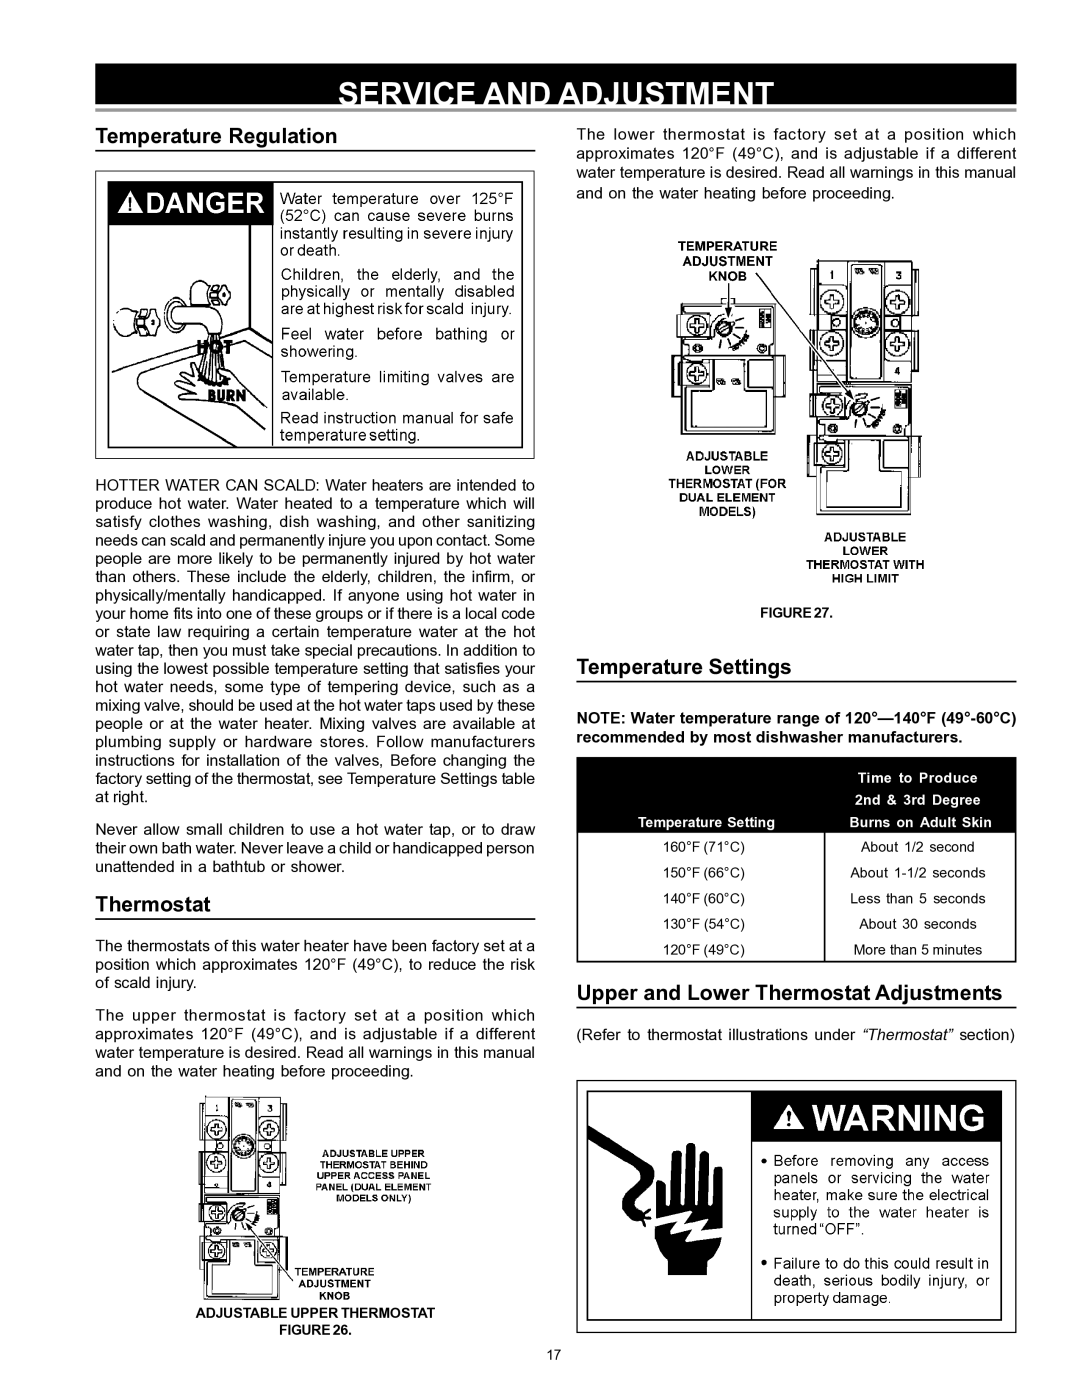 Sears 153.329264 owner manual Service and Adjustment, Temperature Regulation, Thermostat, Temperature Settings 